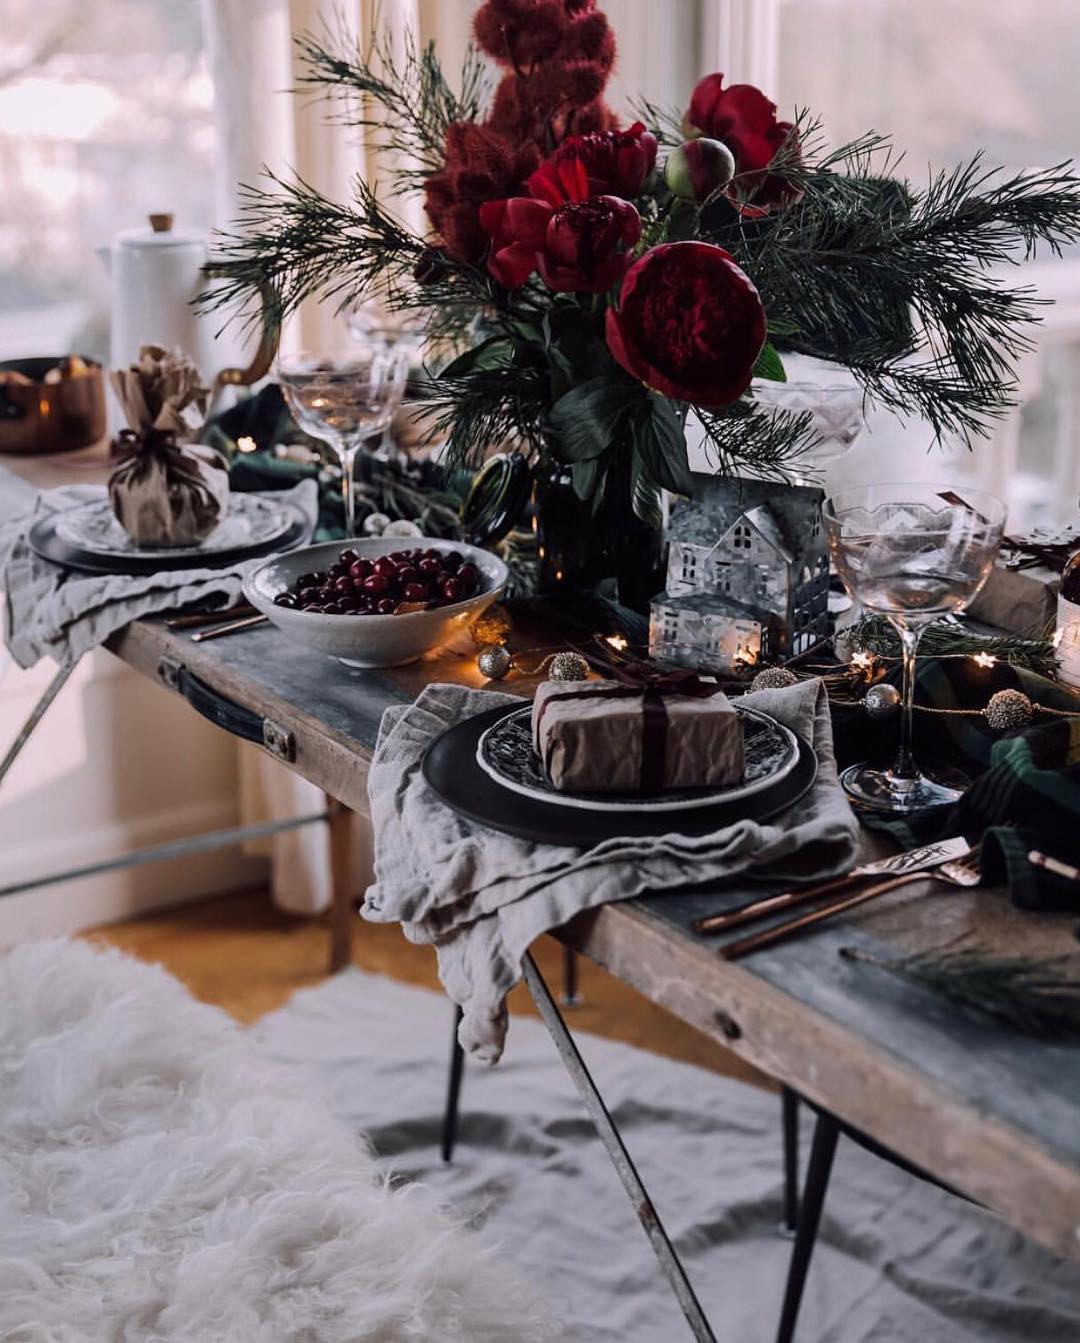 Love this tablesetting with the christmas touch!